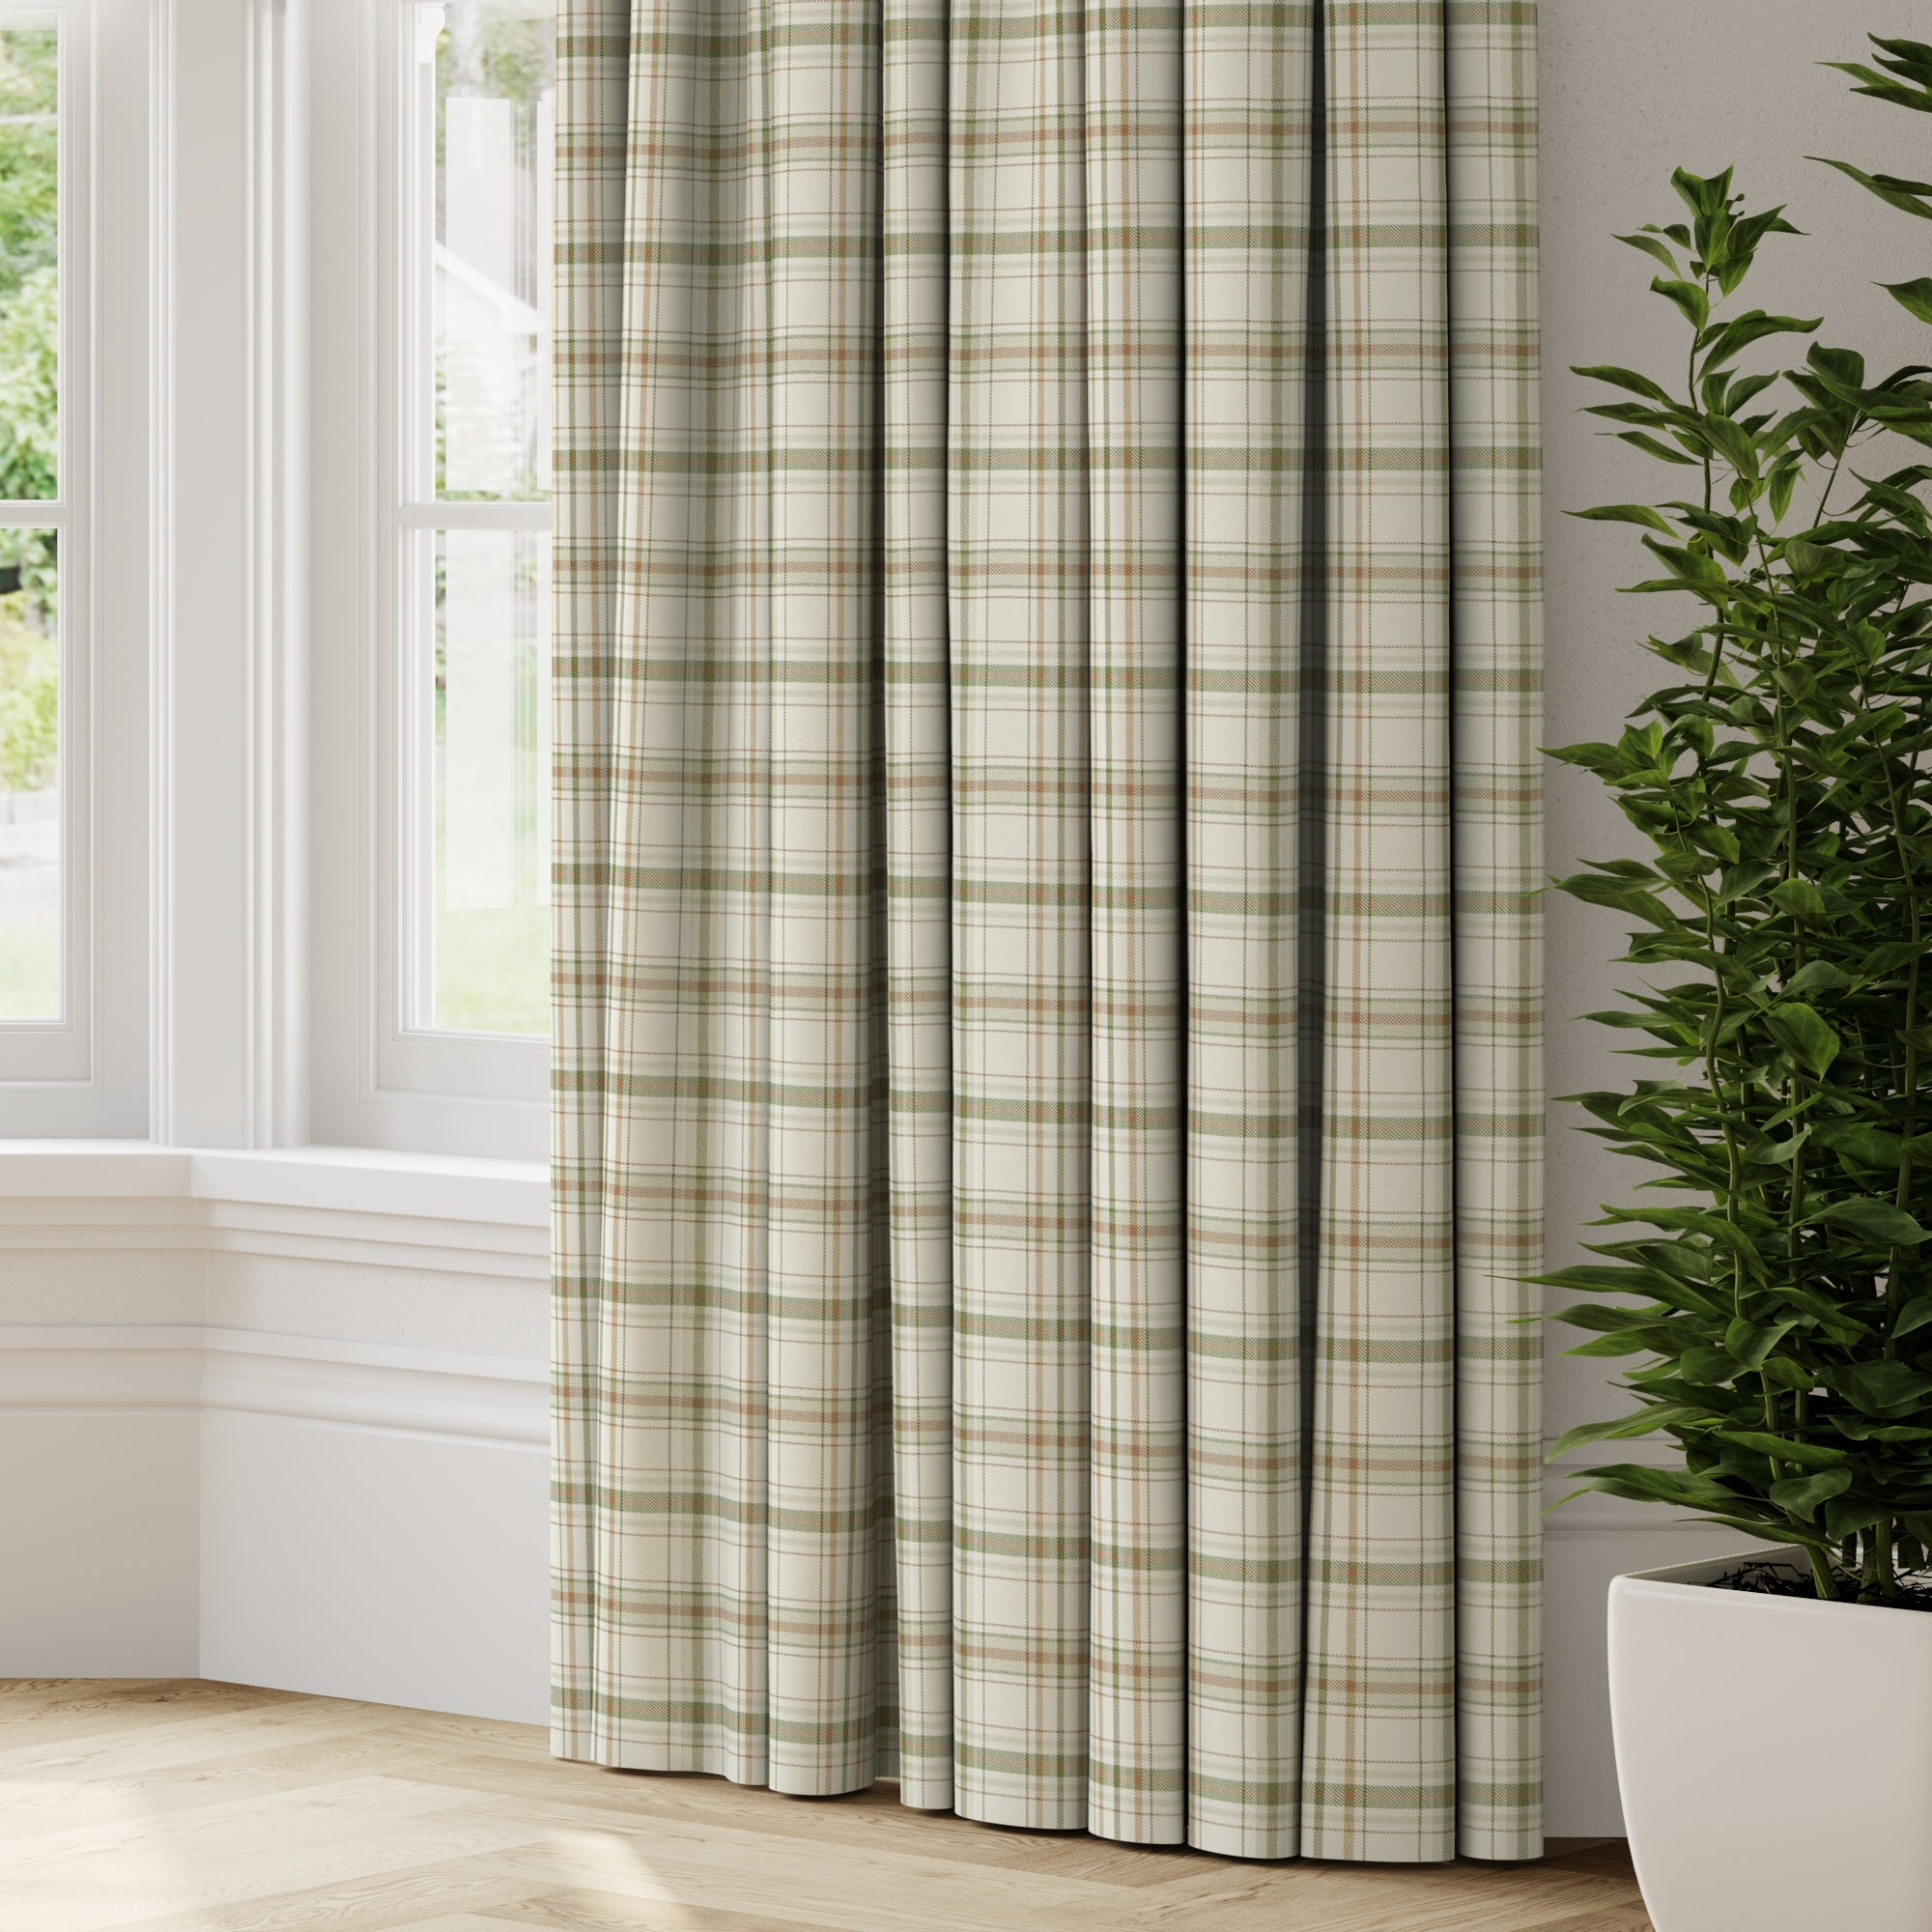 Esk Made to Measure Fire Retardant Curtains Green/White